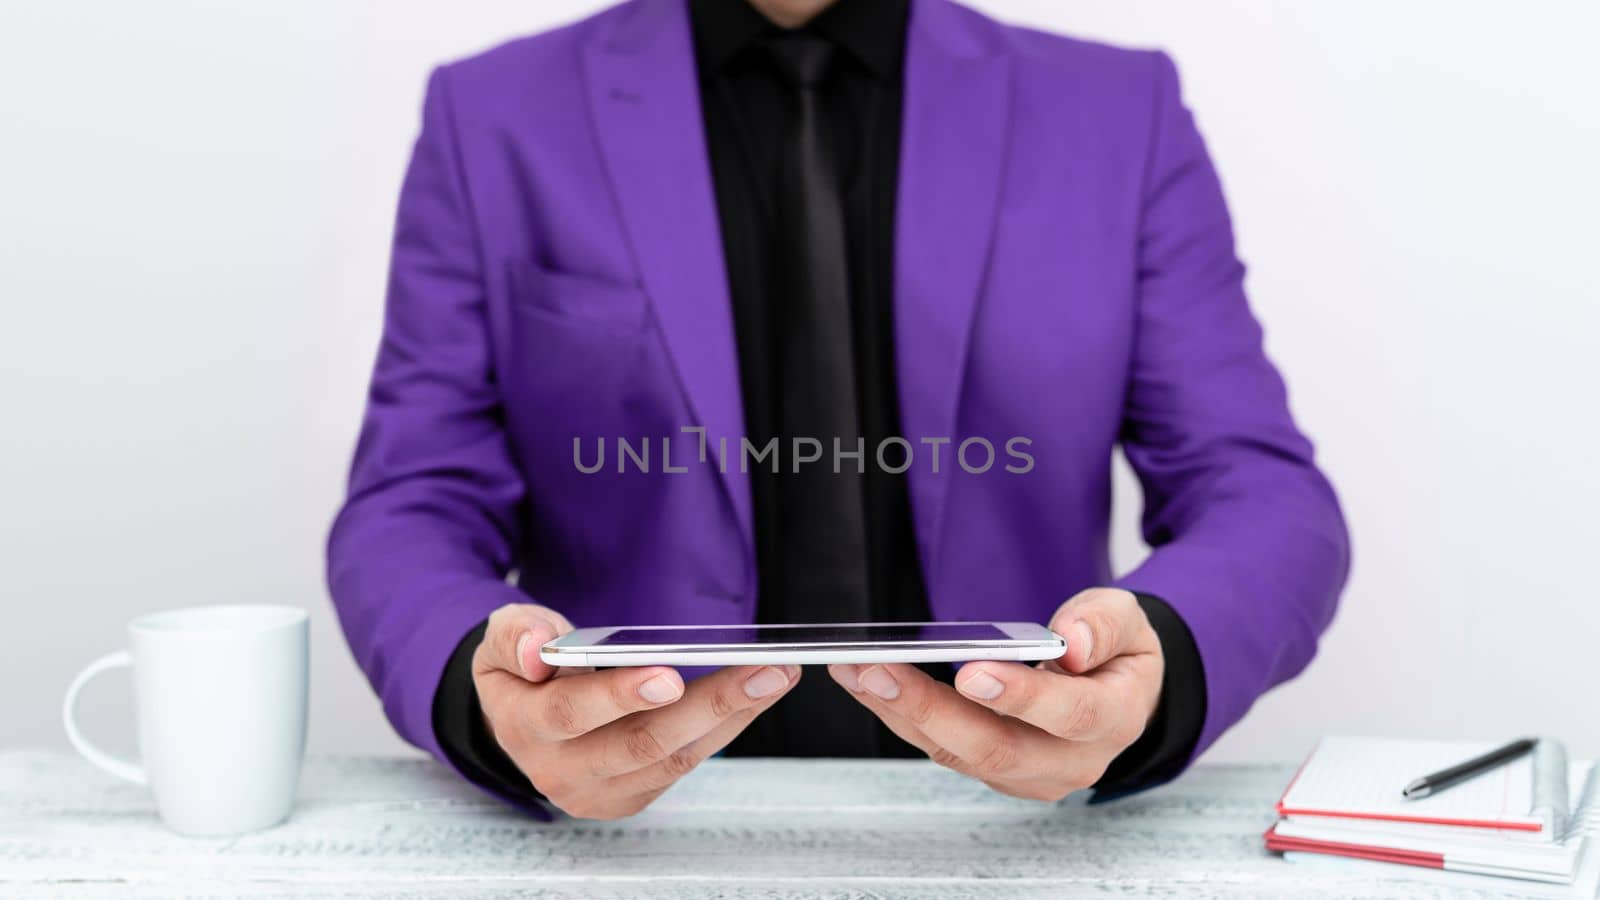 Businessman in Purple jacket sitting at table and holding a mobile phone.